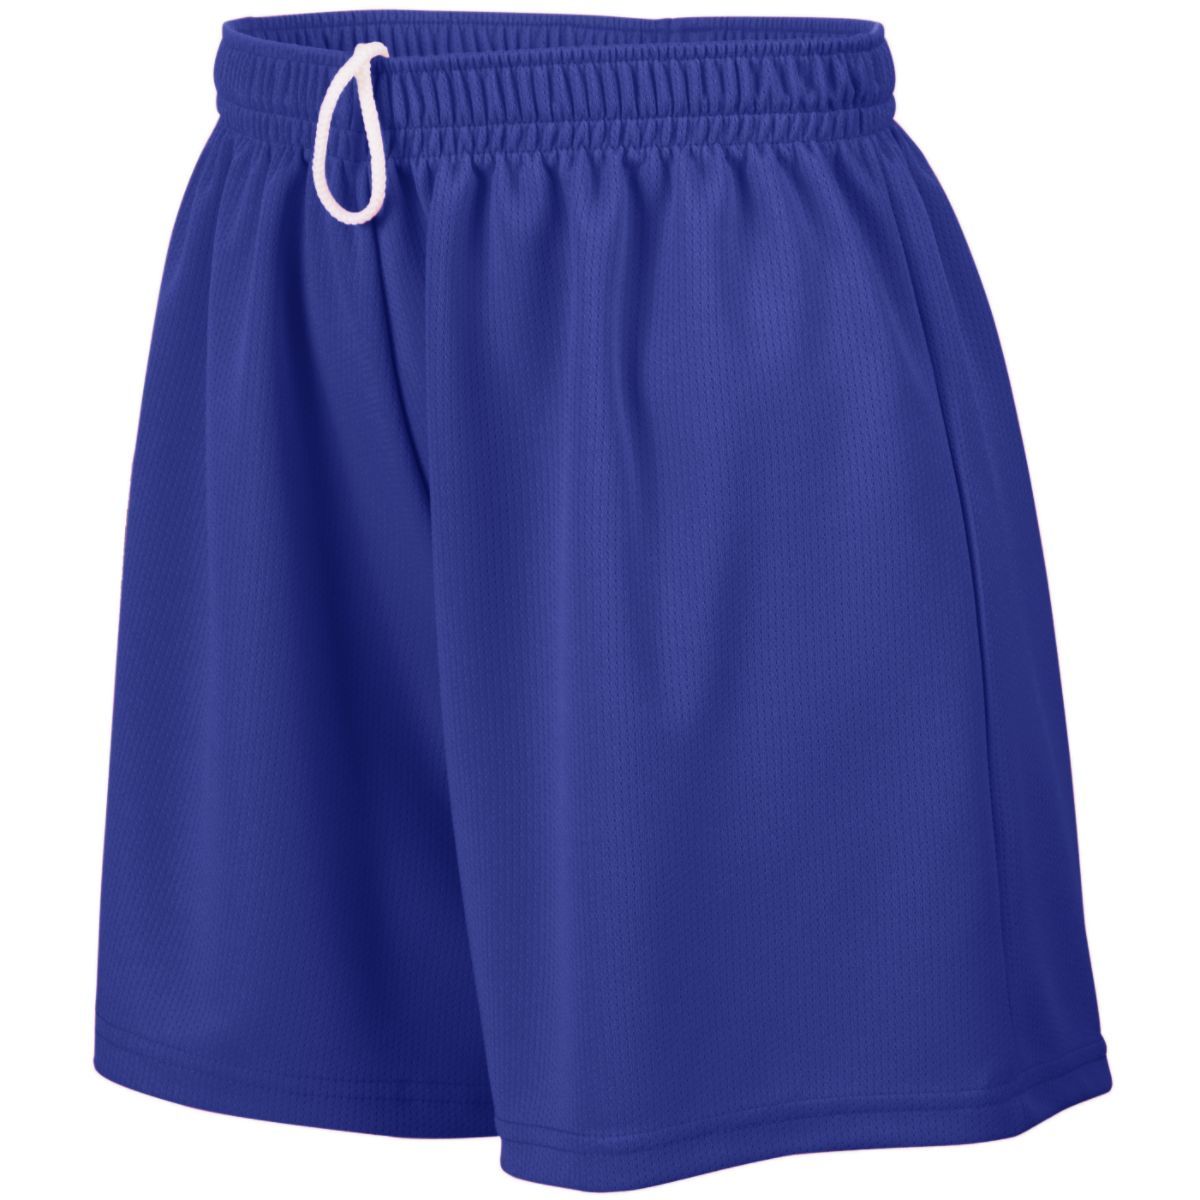 Augusta Sportswear Ladies Wicking Mesh Shorts in Purple  -Part of the Ladies, Ladies-Shorts, Augusta-Products, Lacrosse, All-Sports, All-Sports-1 product lines at KanaleyCreations.com